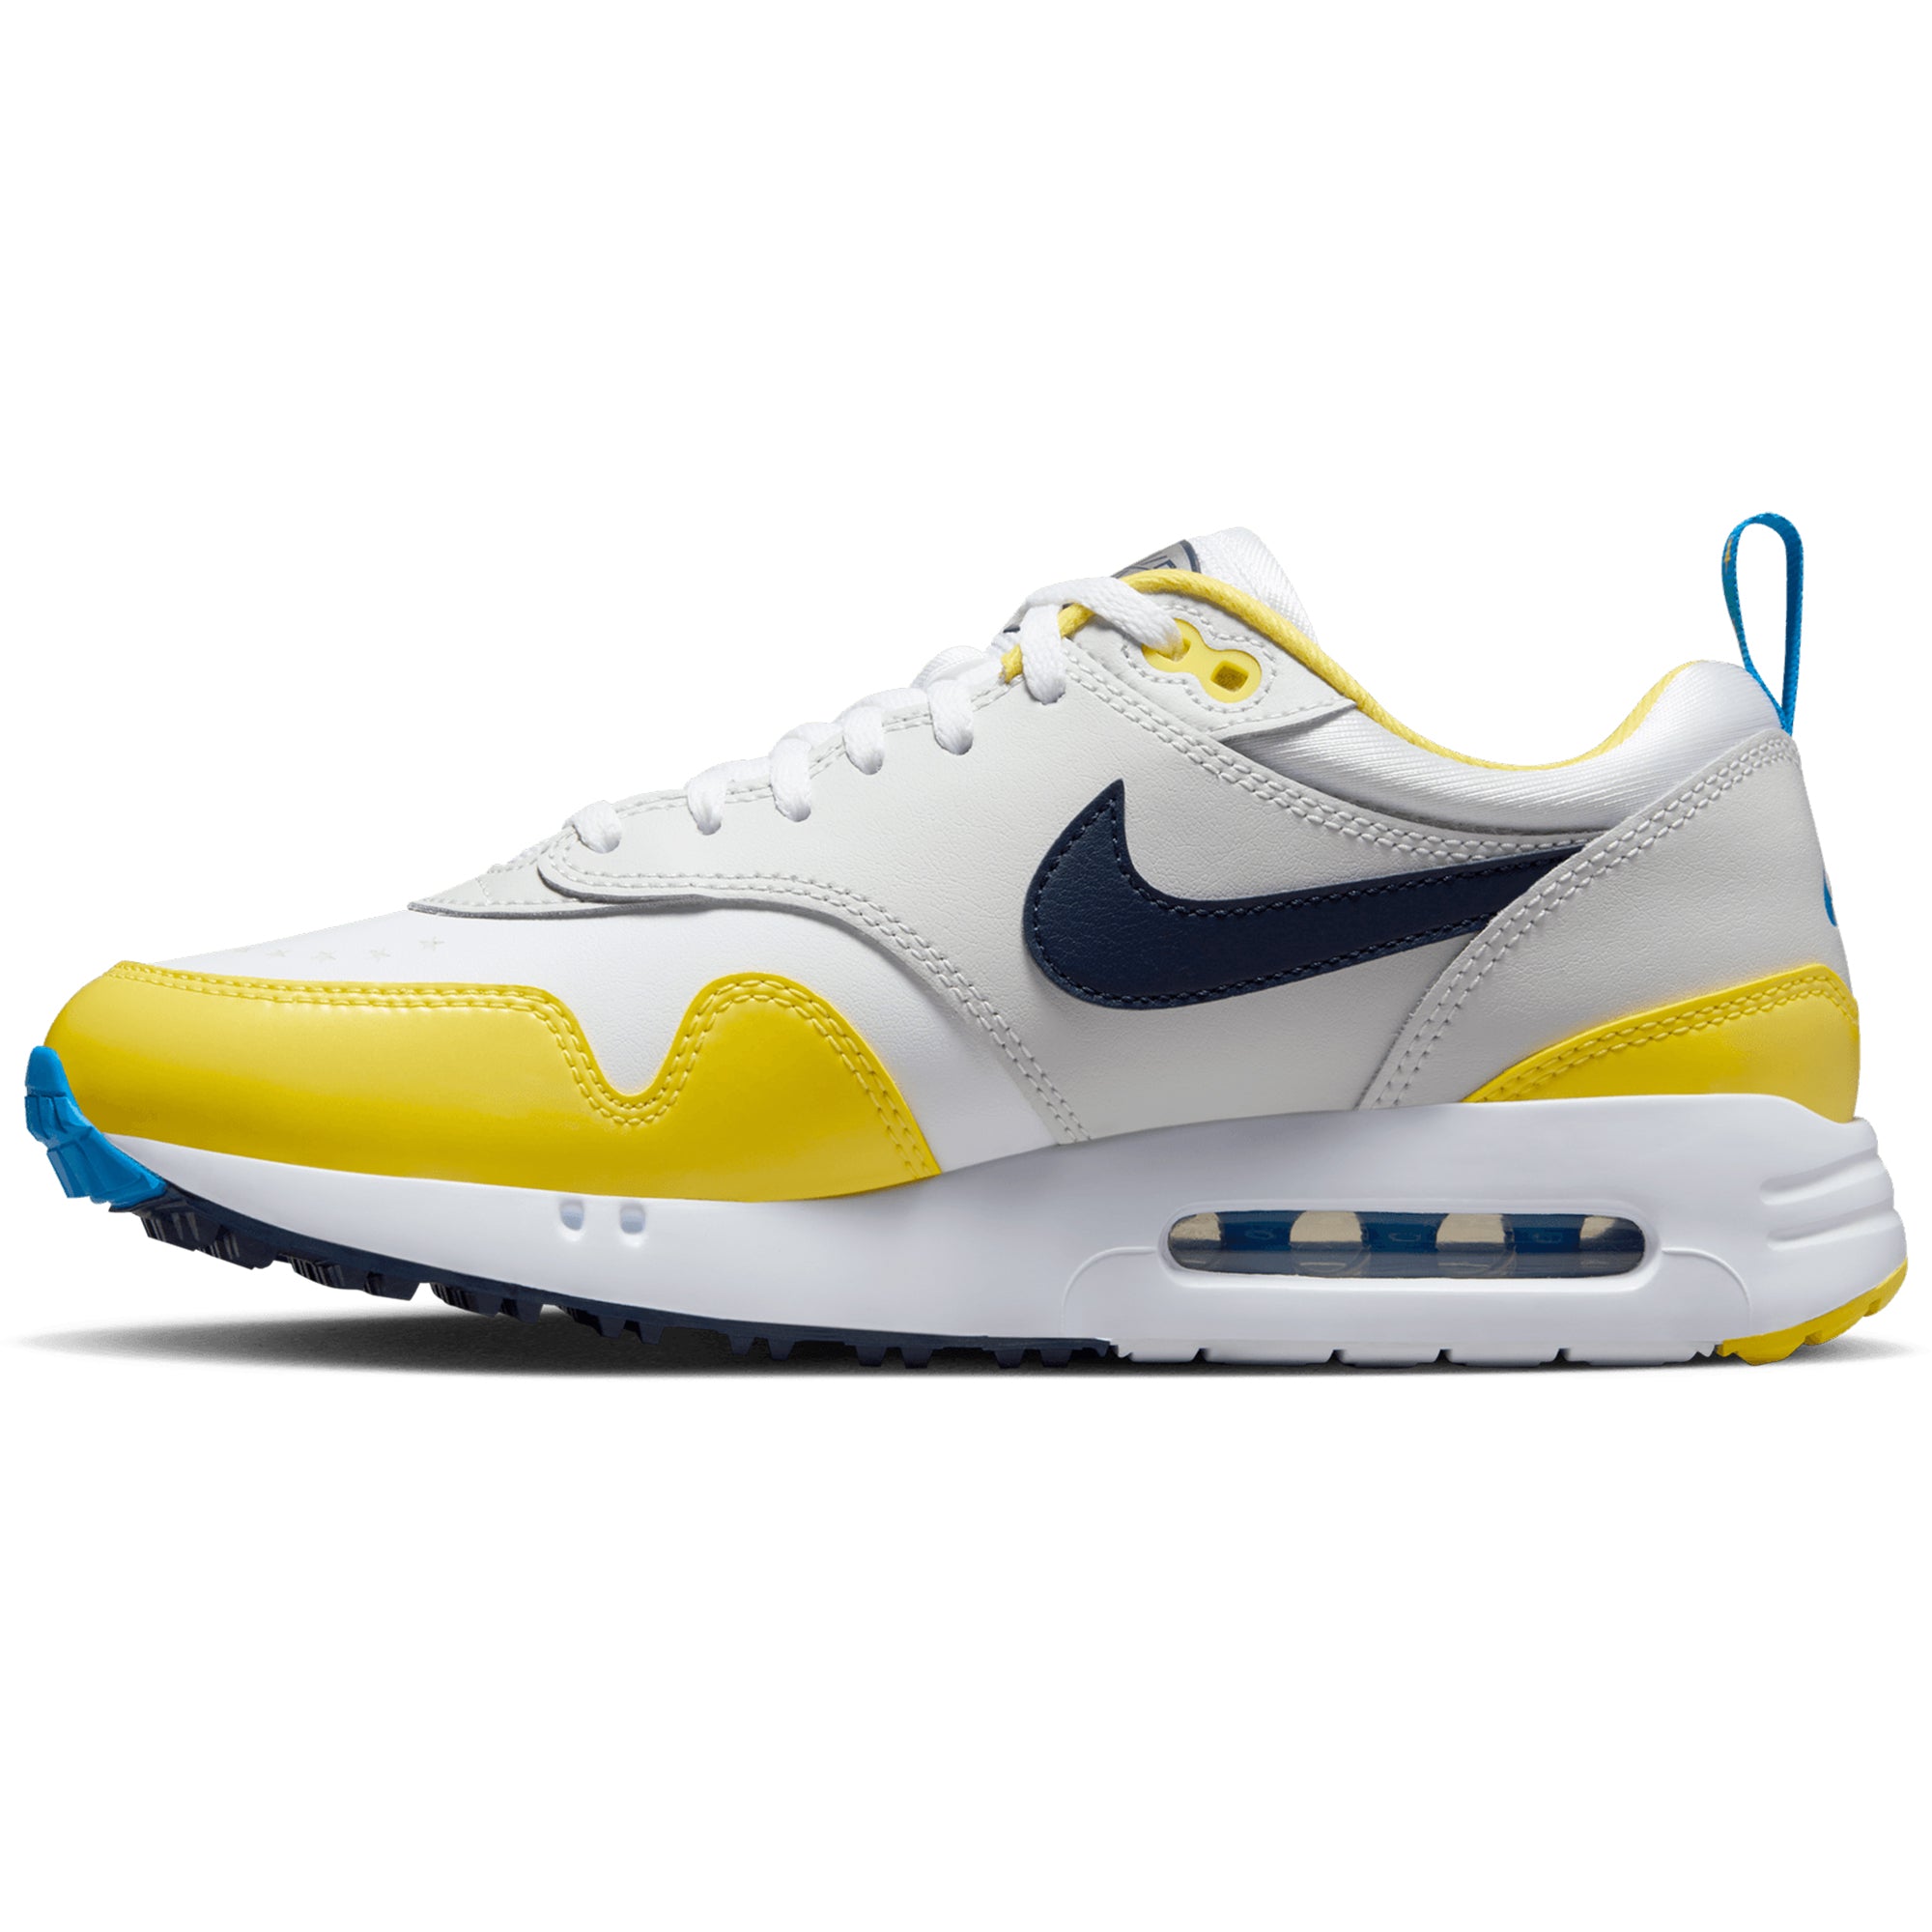 Nike Golf Air Max 1 '86 G Ryder Cup NRG Shoes